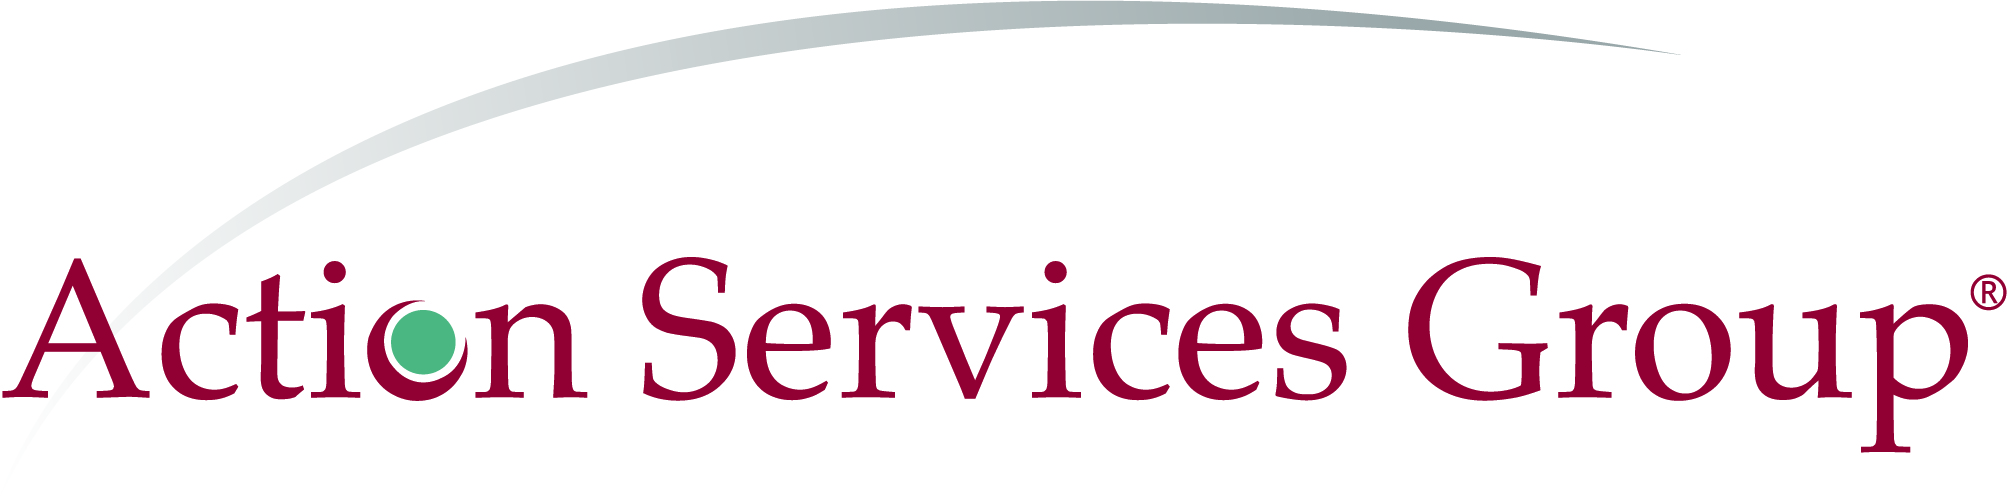 Partner Action Services Group logo